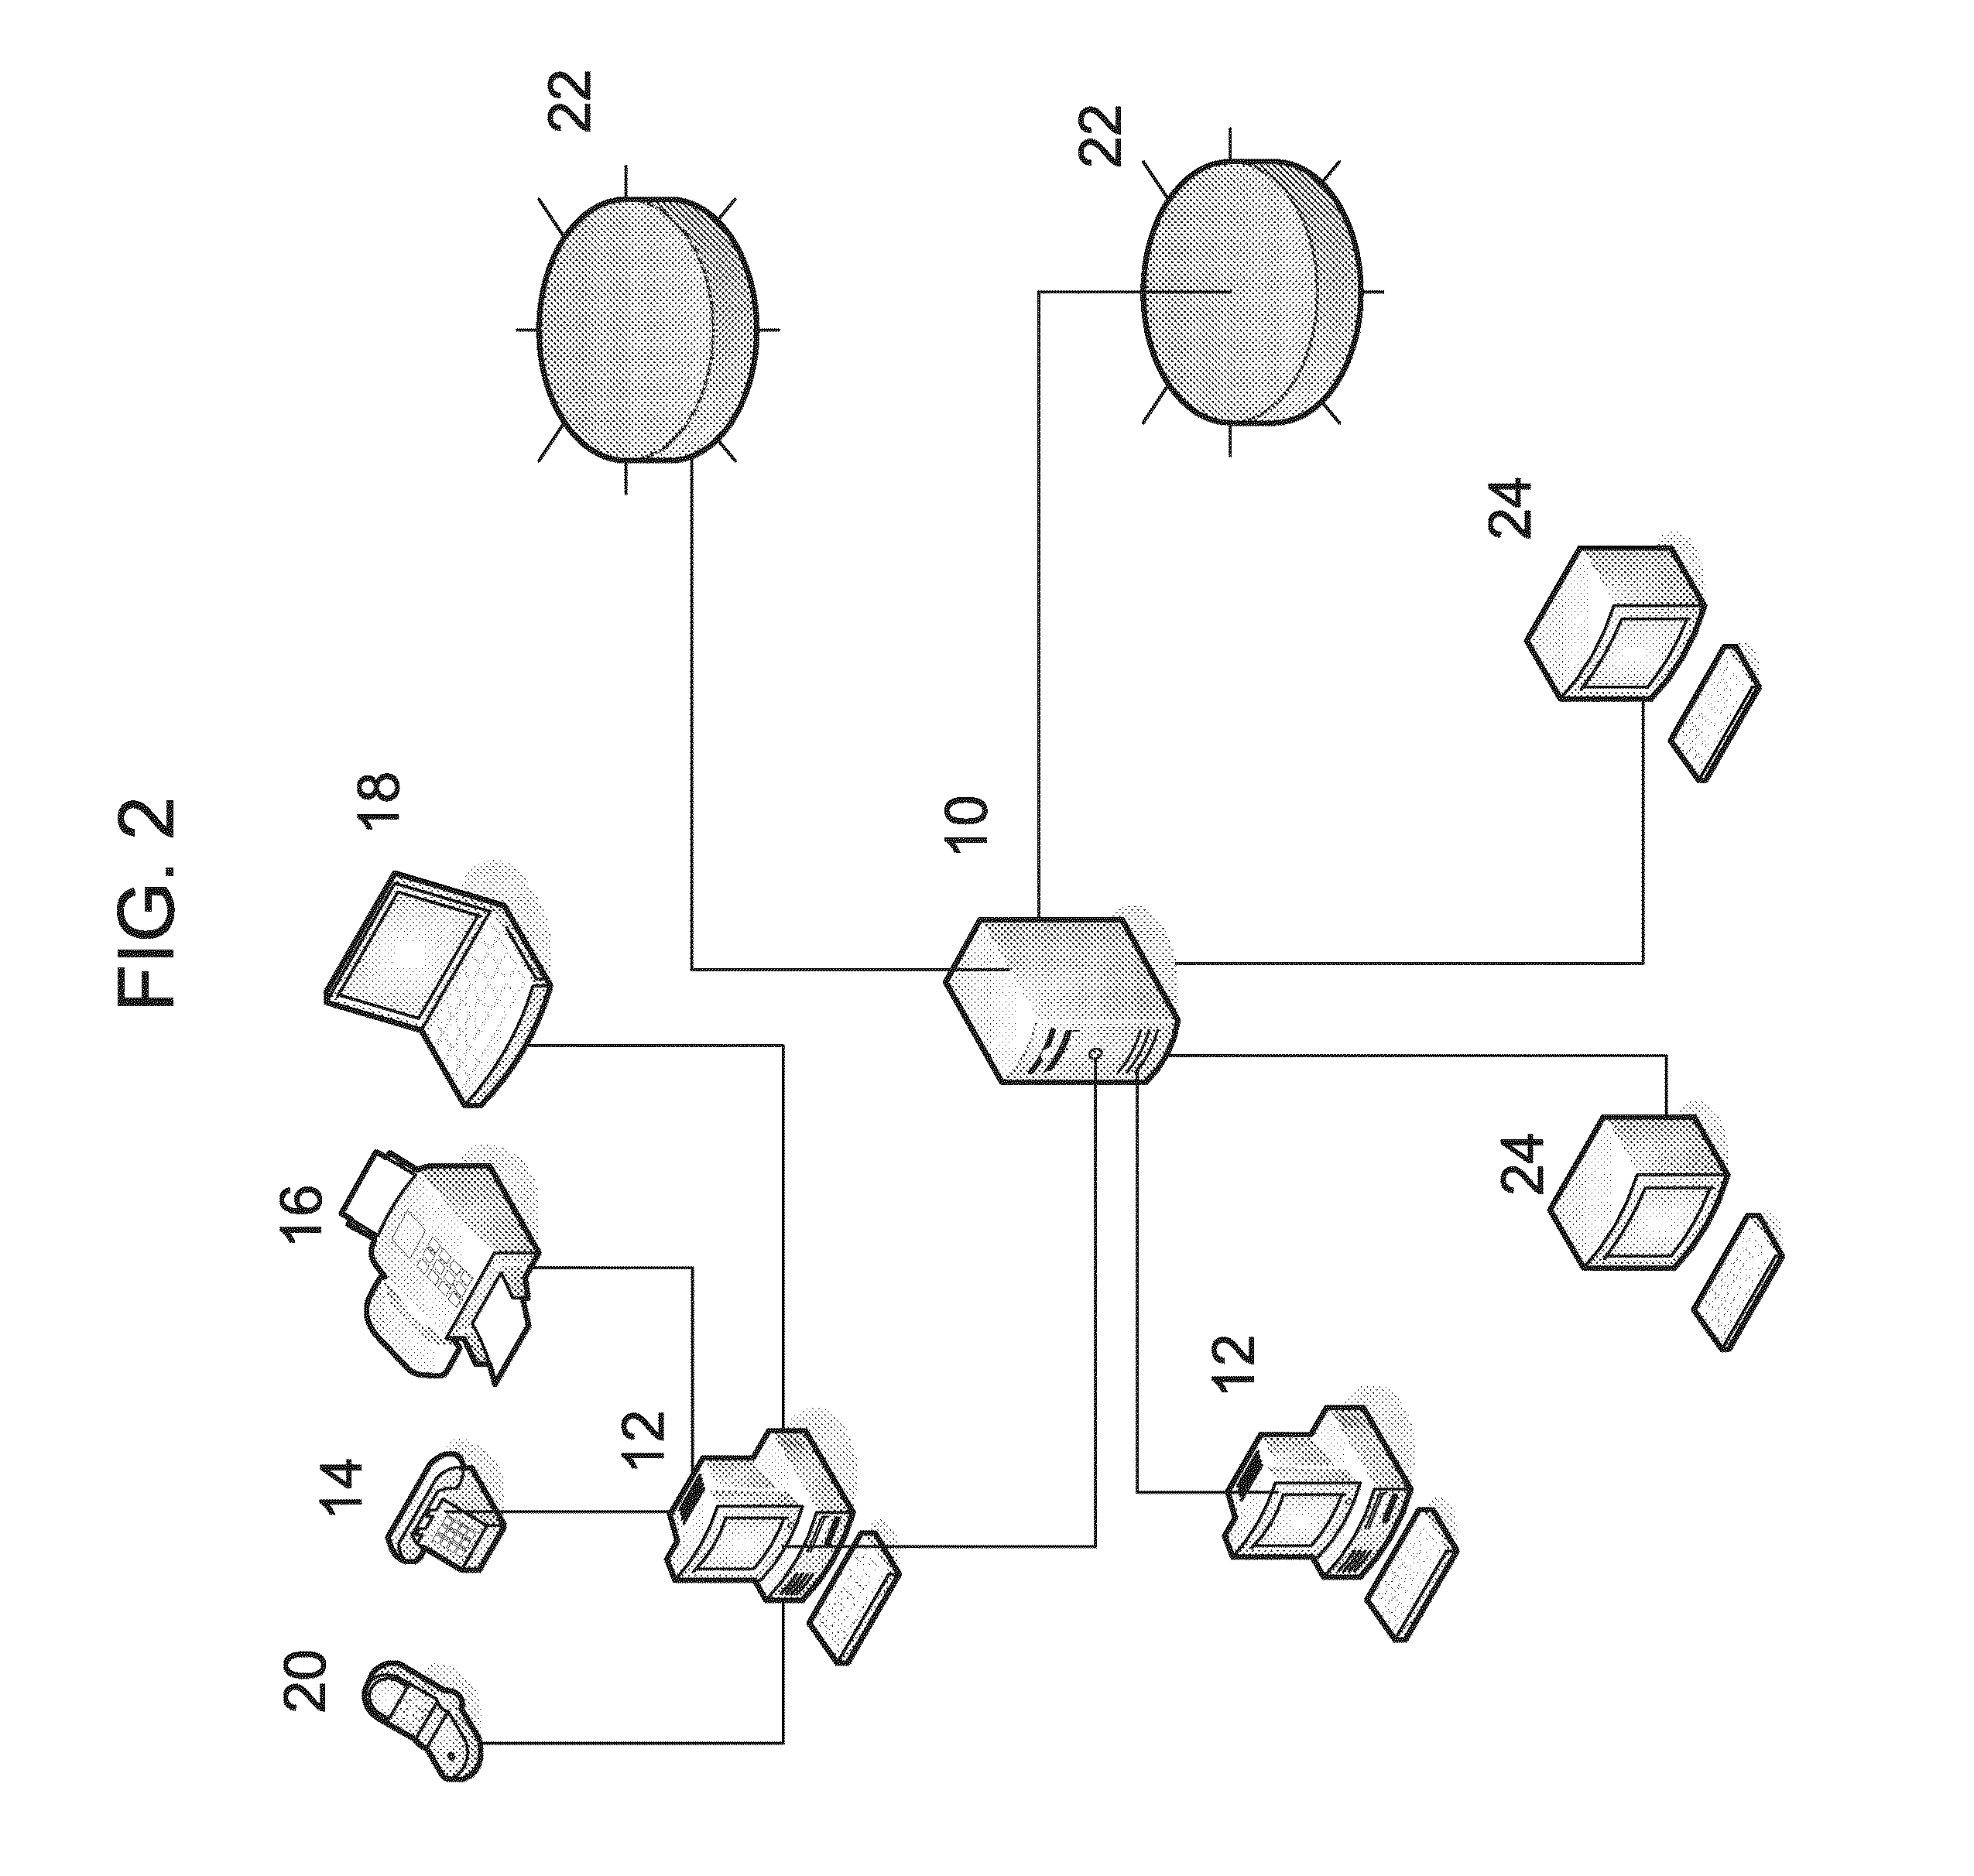 System and method for providing dispute resolution for electronic payment transactions